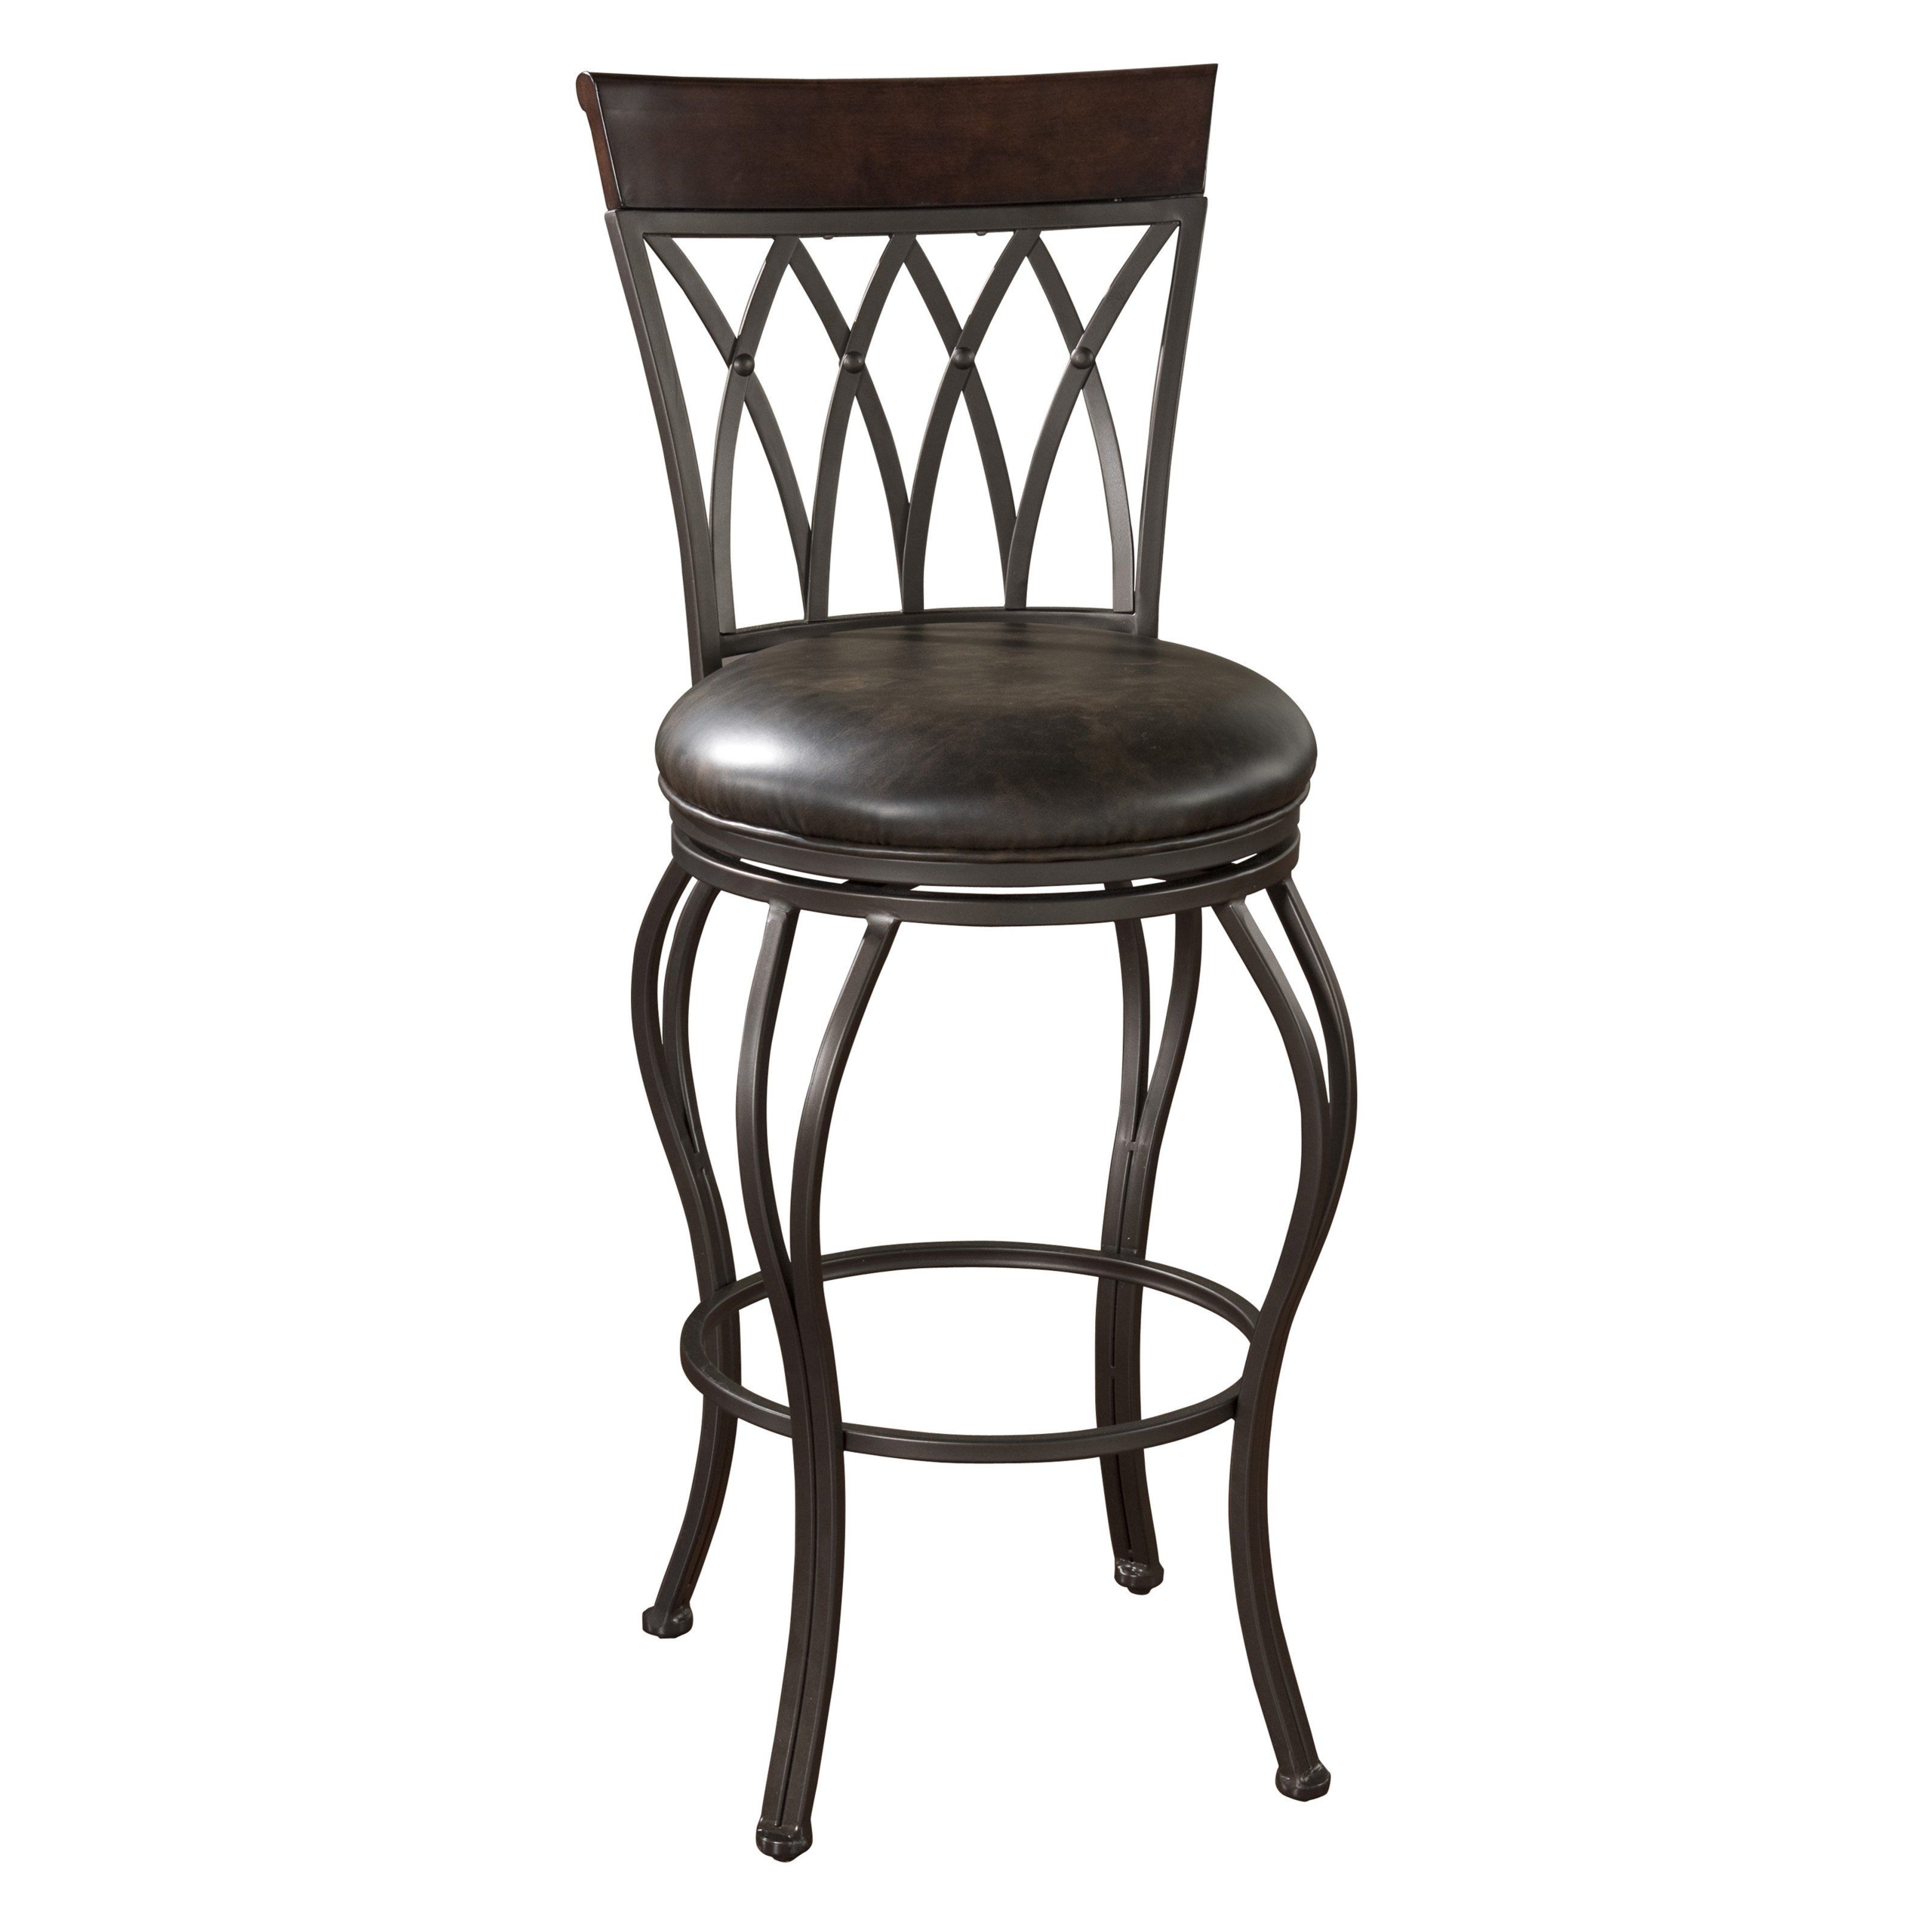 182 parmele swivel counter stool counter stool this italian style